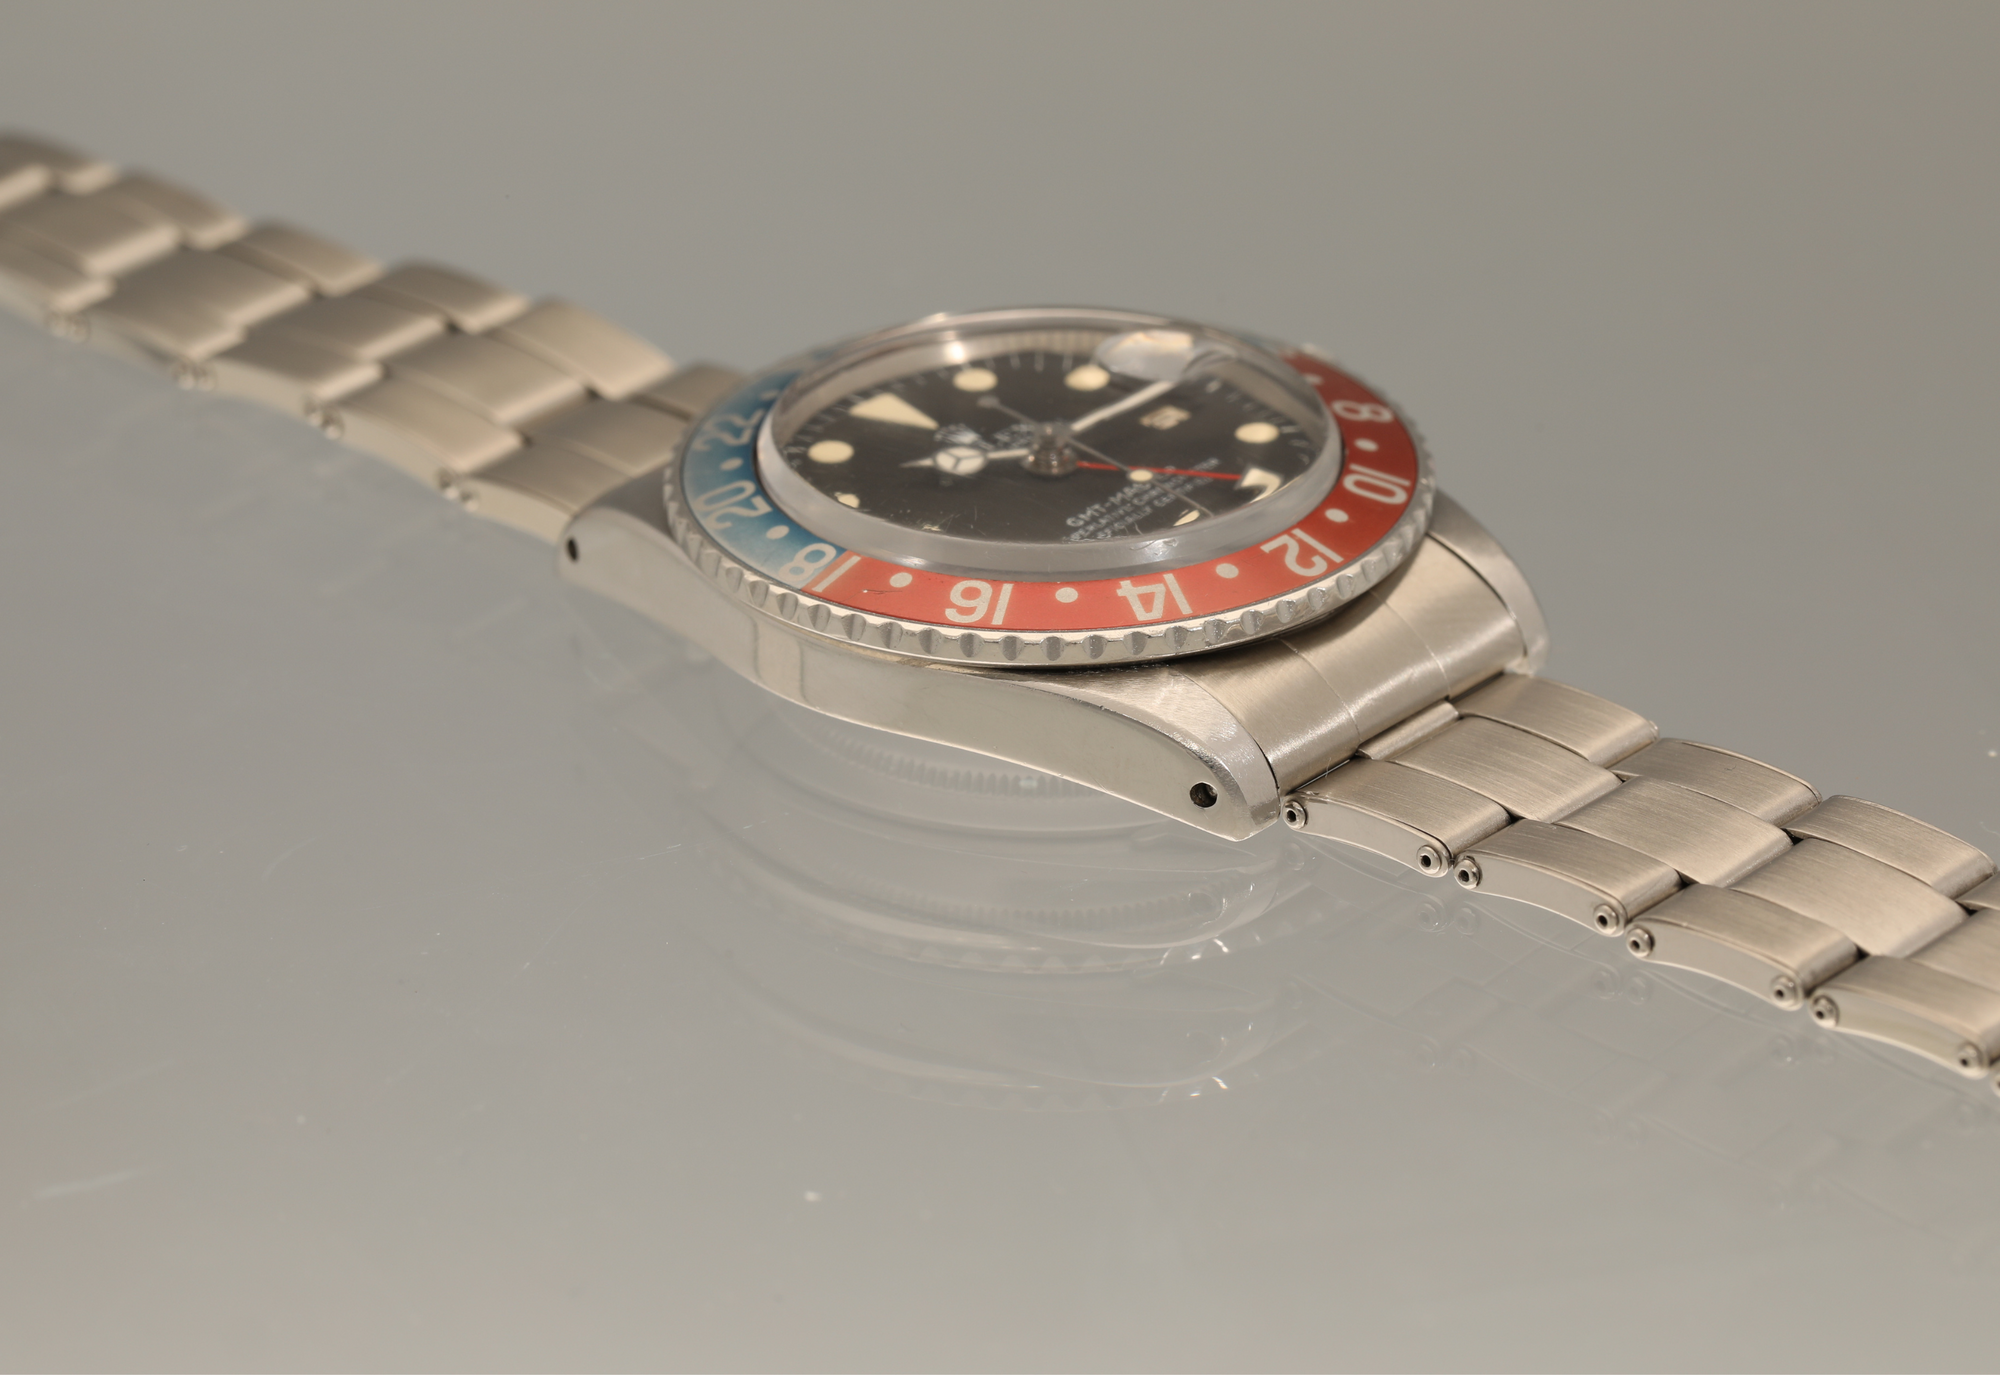 Rolex 1675 Maxi Dial from 1972